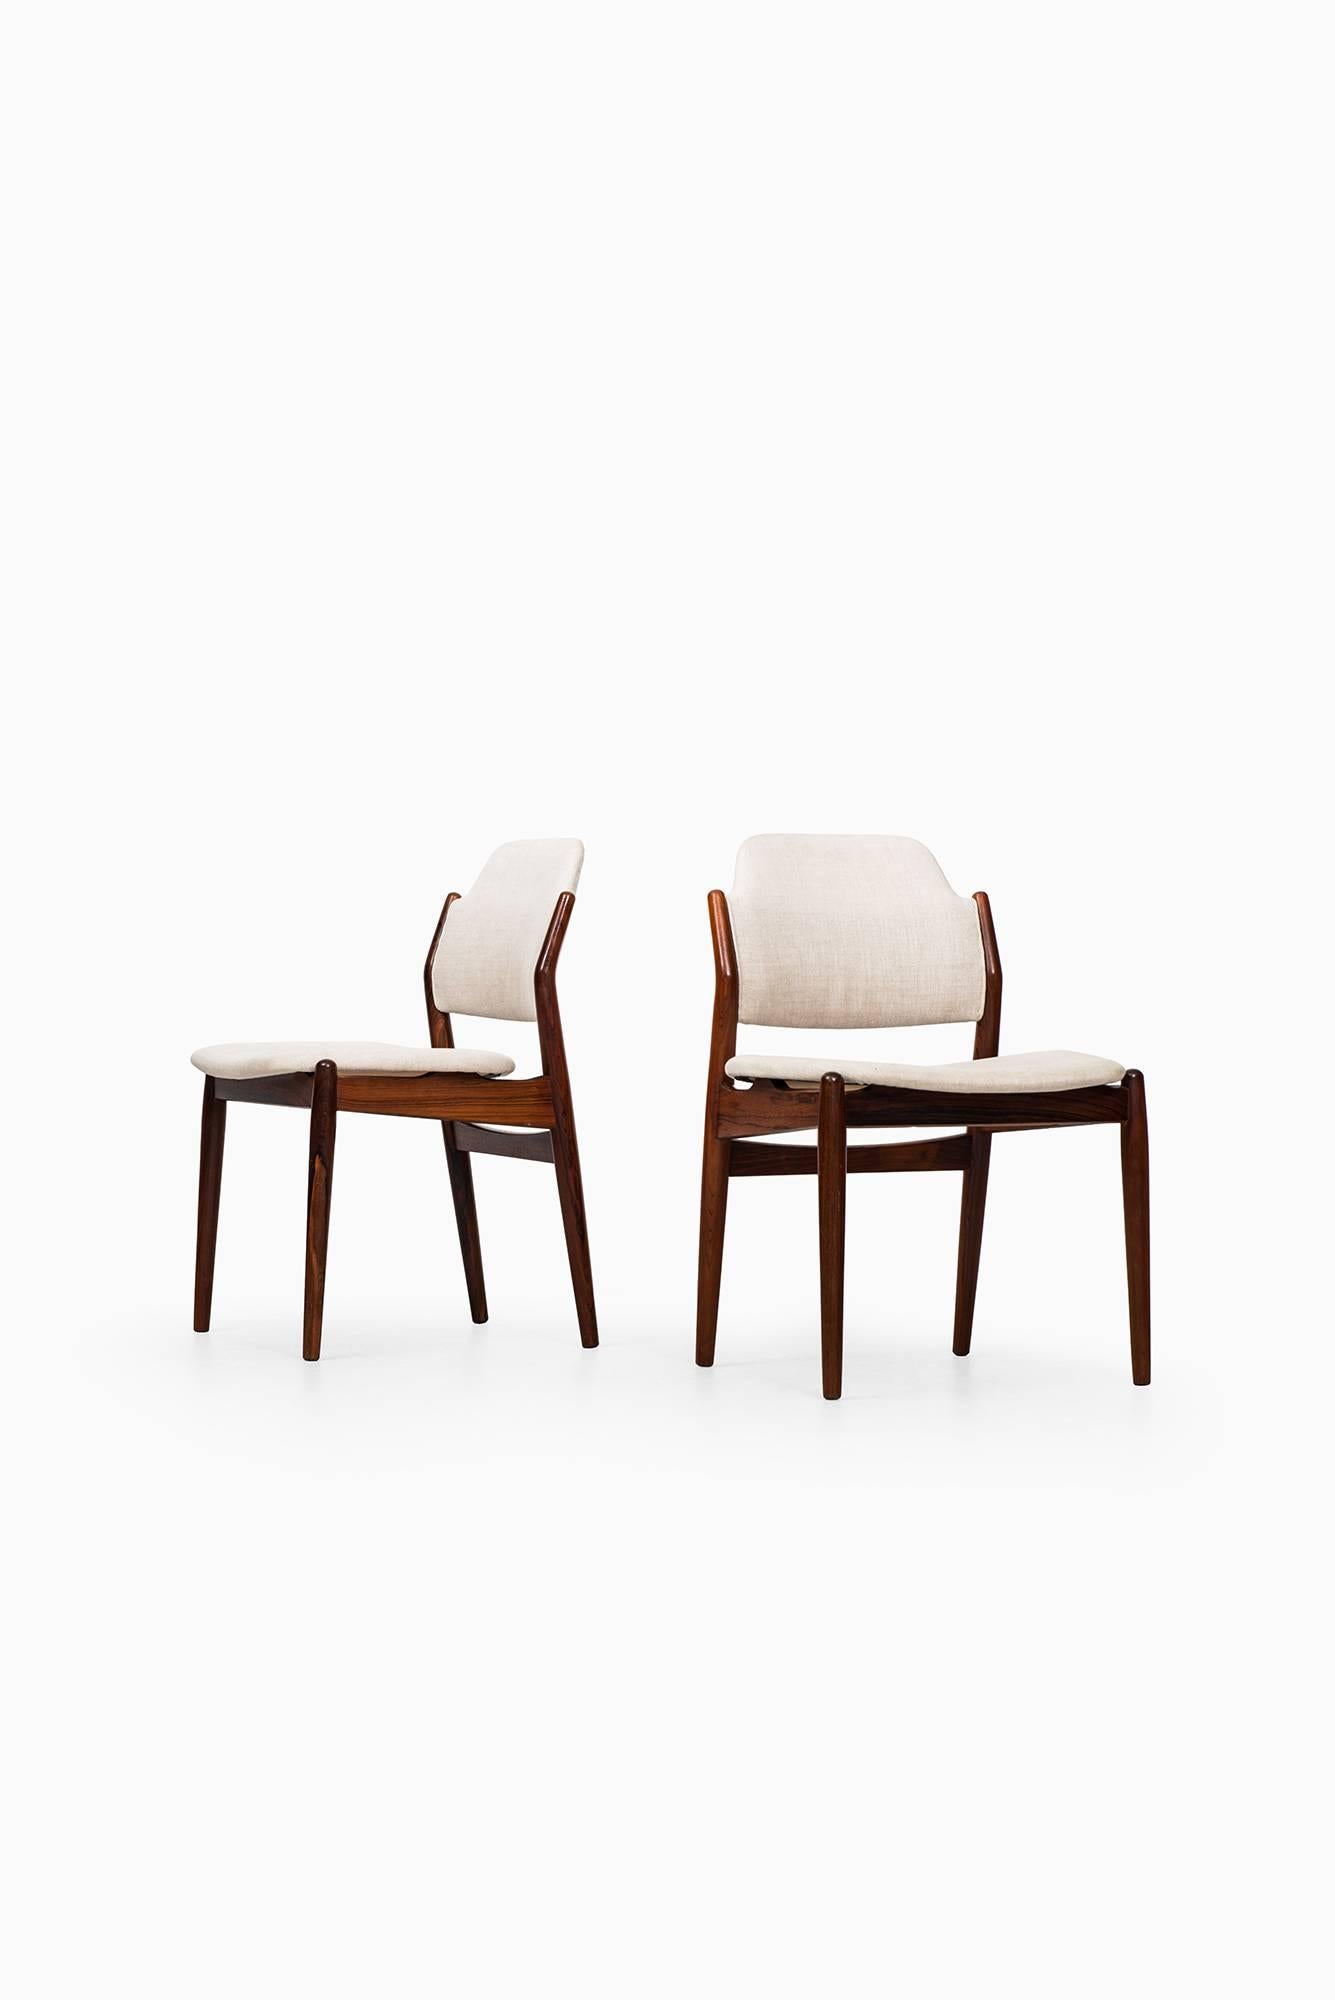 Rare set of eight dining chairs model 462 designed by Arne Vodder. Produced by Sibast Møbelfabrik in Denmark.